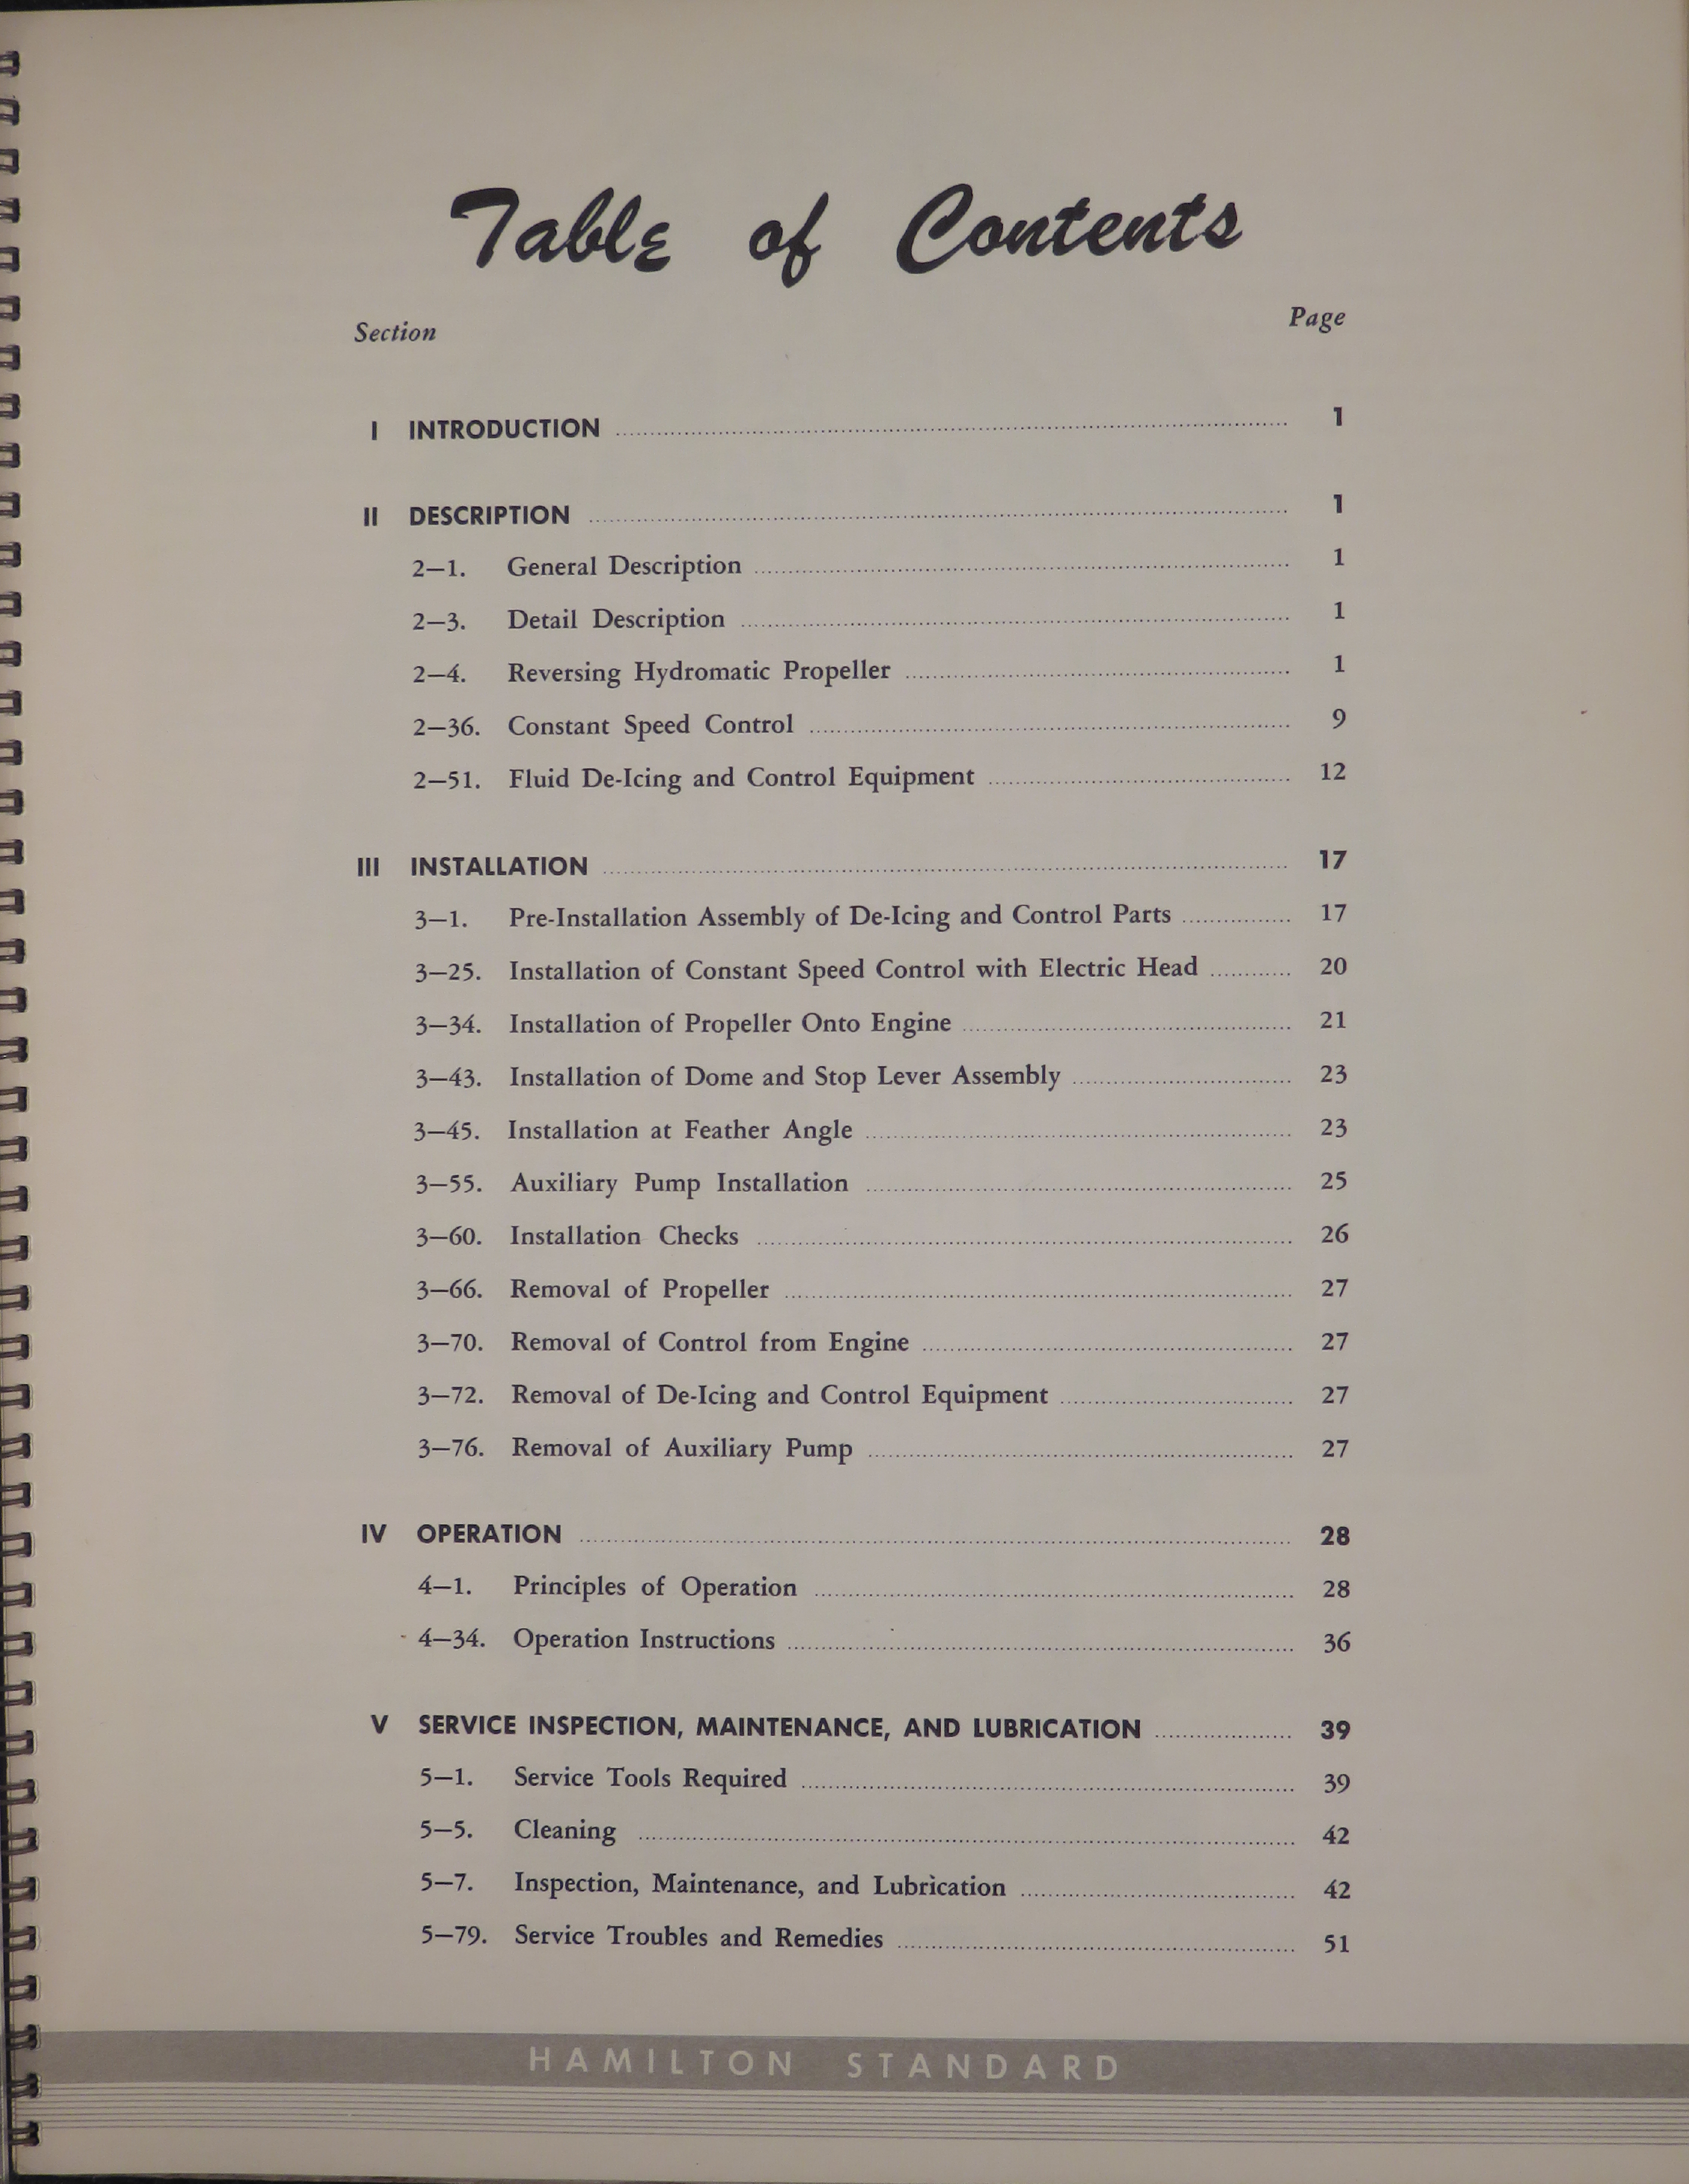 Sample page 5 from AirCorps Library document: Maintenance Manual for Hamilton Standard Model 43E60 Hydromatic Propellers